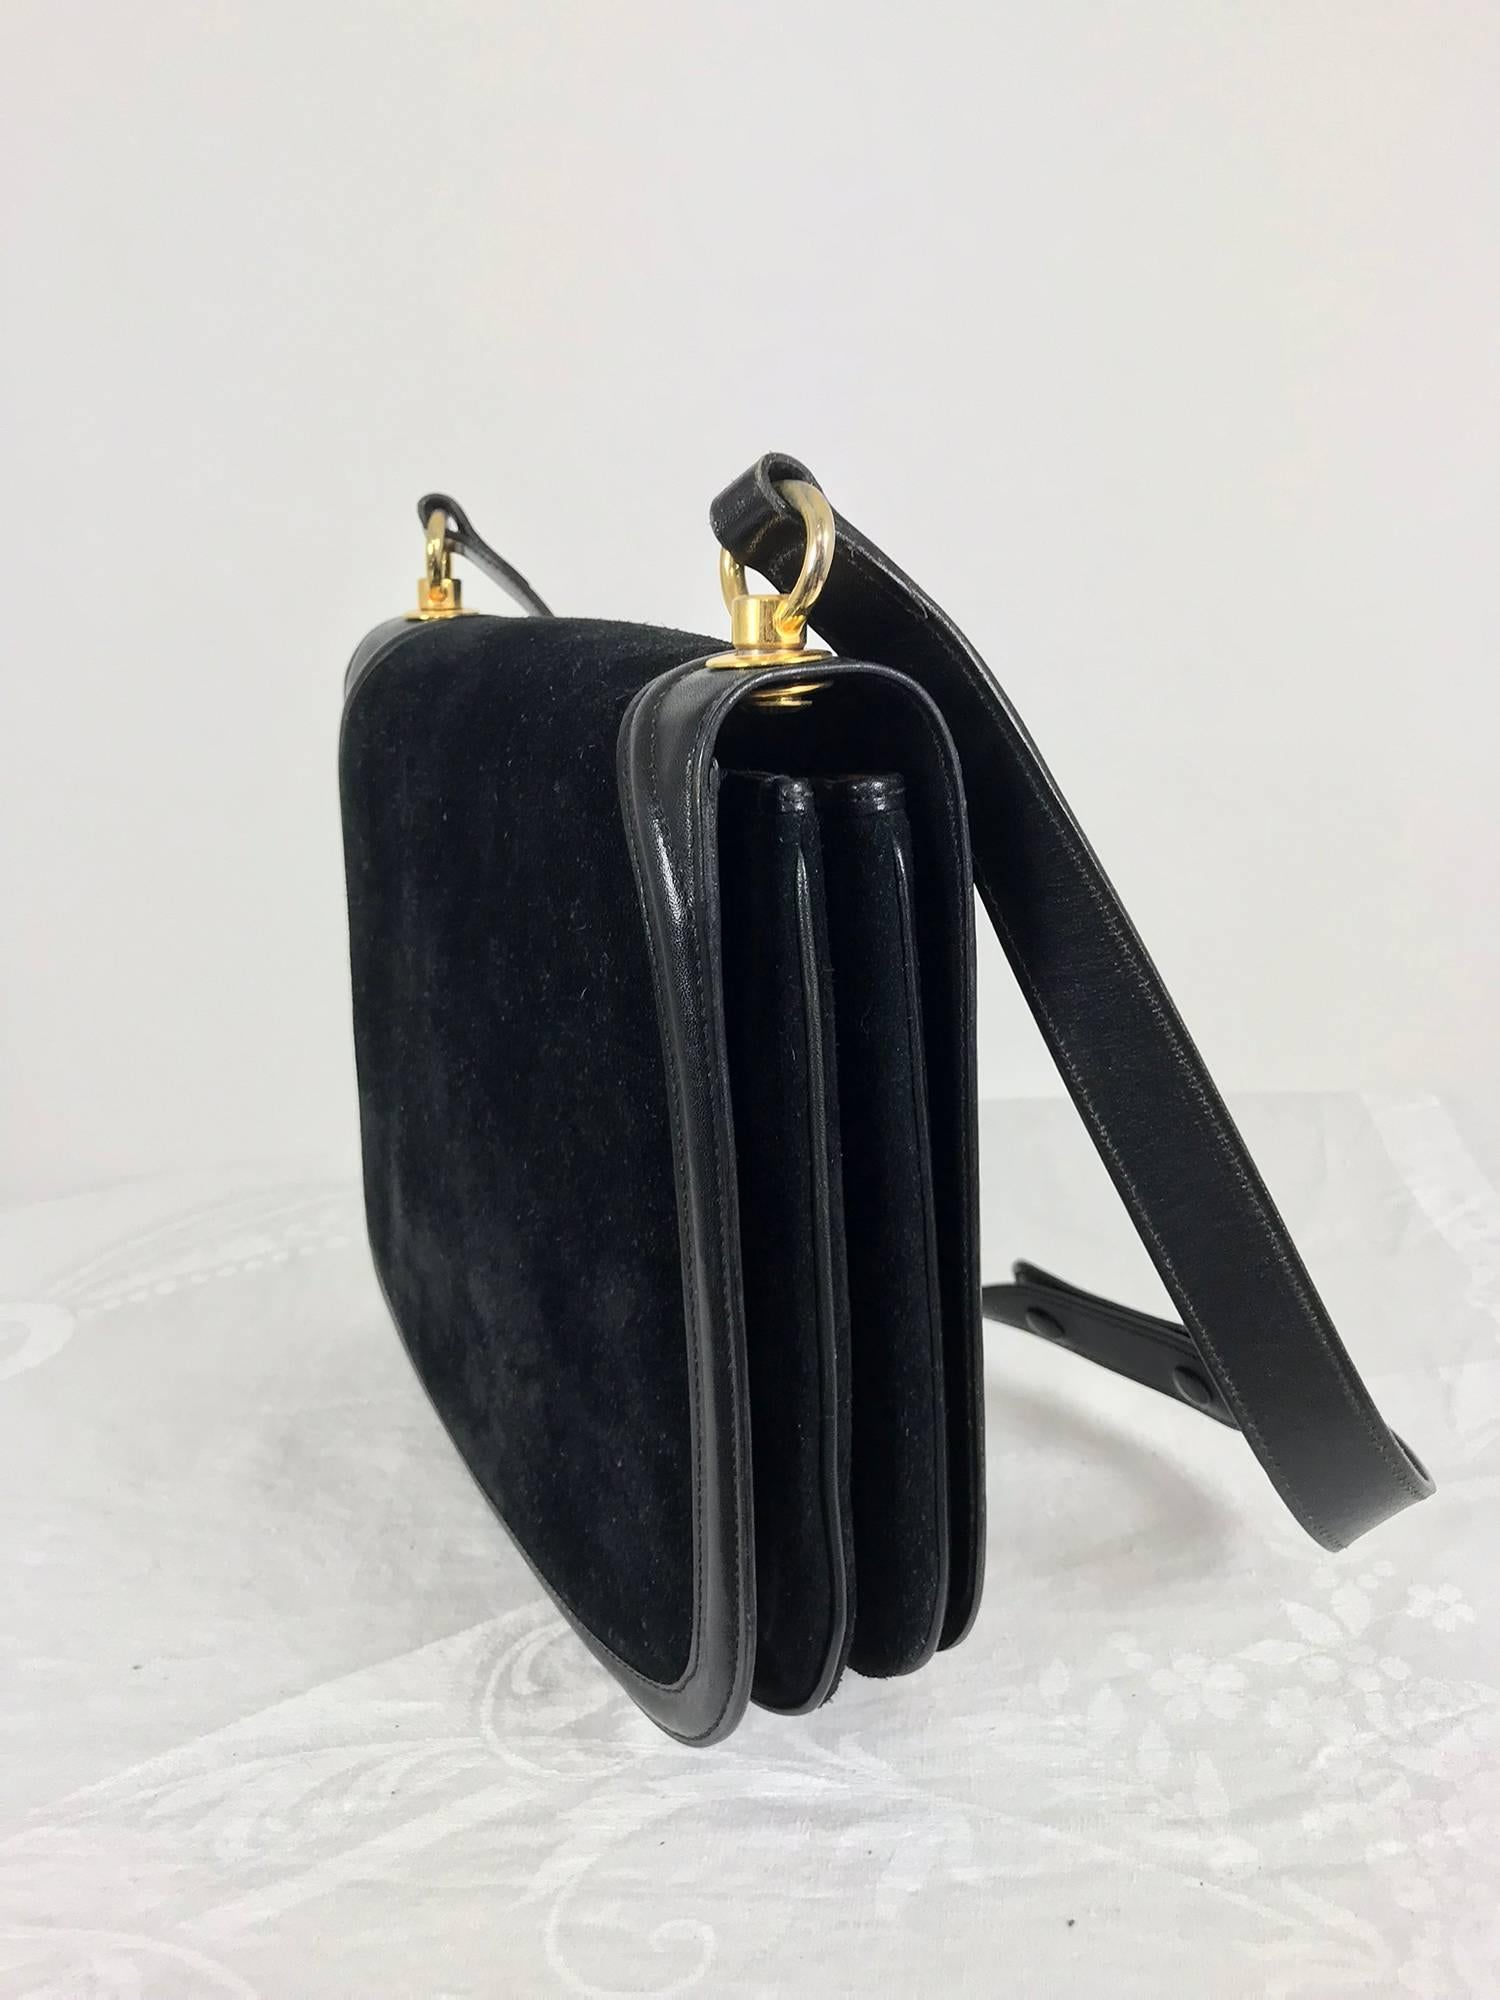 Gucci black suede and leather Blondie shoulder bag with gold hardware ...